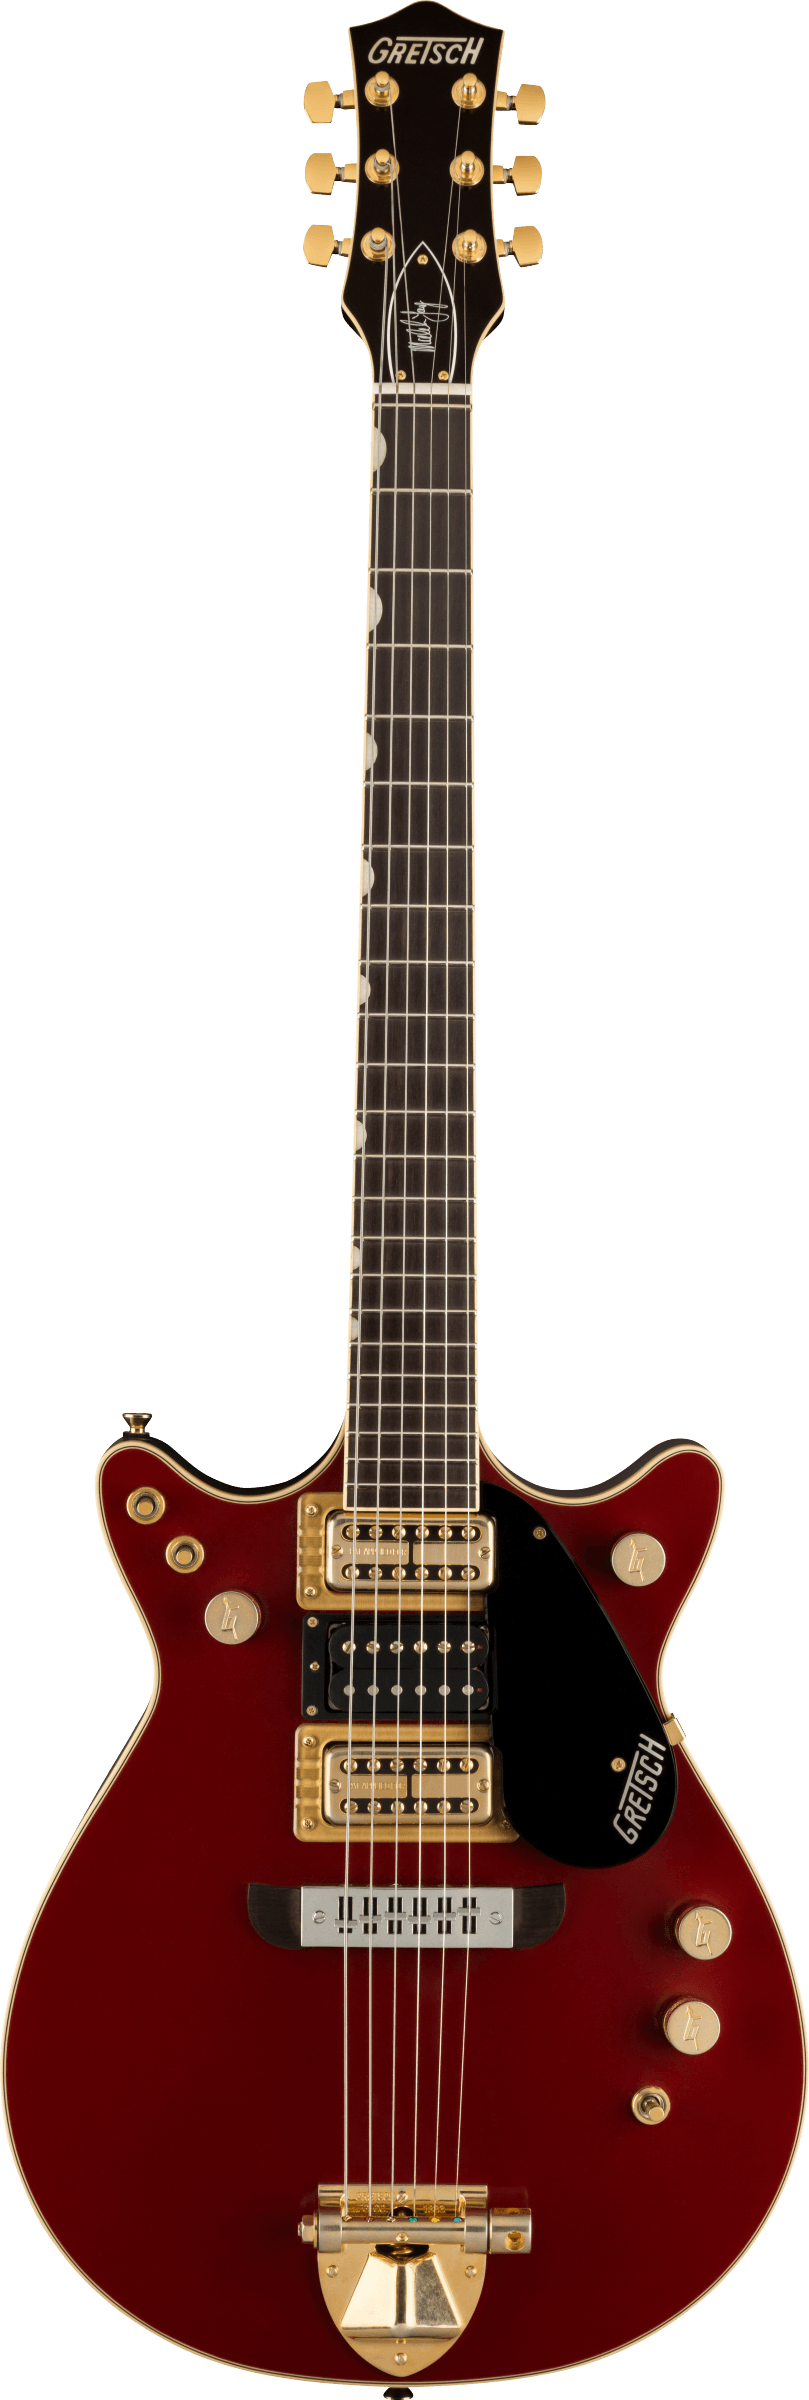 Full frontal of Gretsch G6131-MY-RB Limited Edition Malcolm Young Signature Jet Vintage Firebird Red.